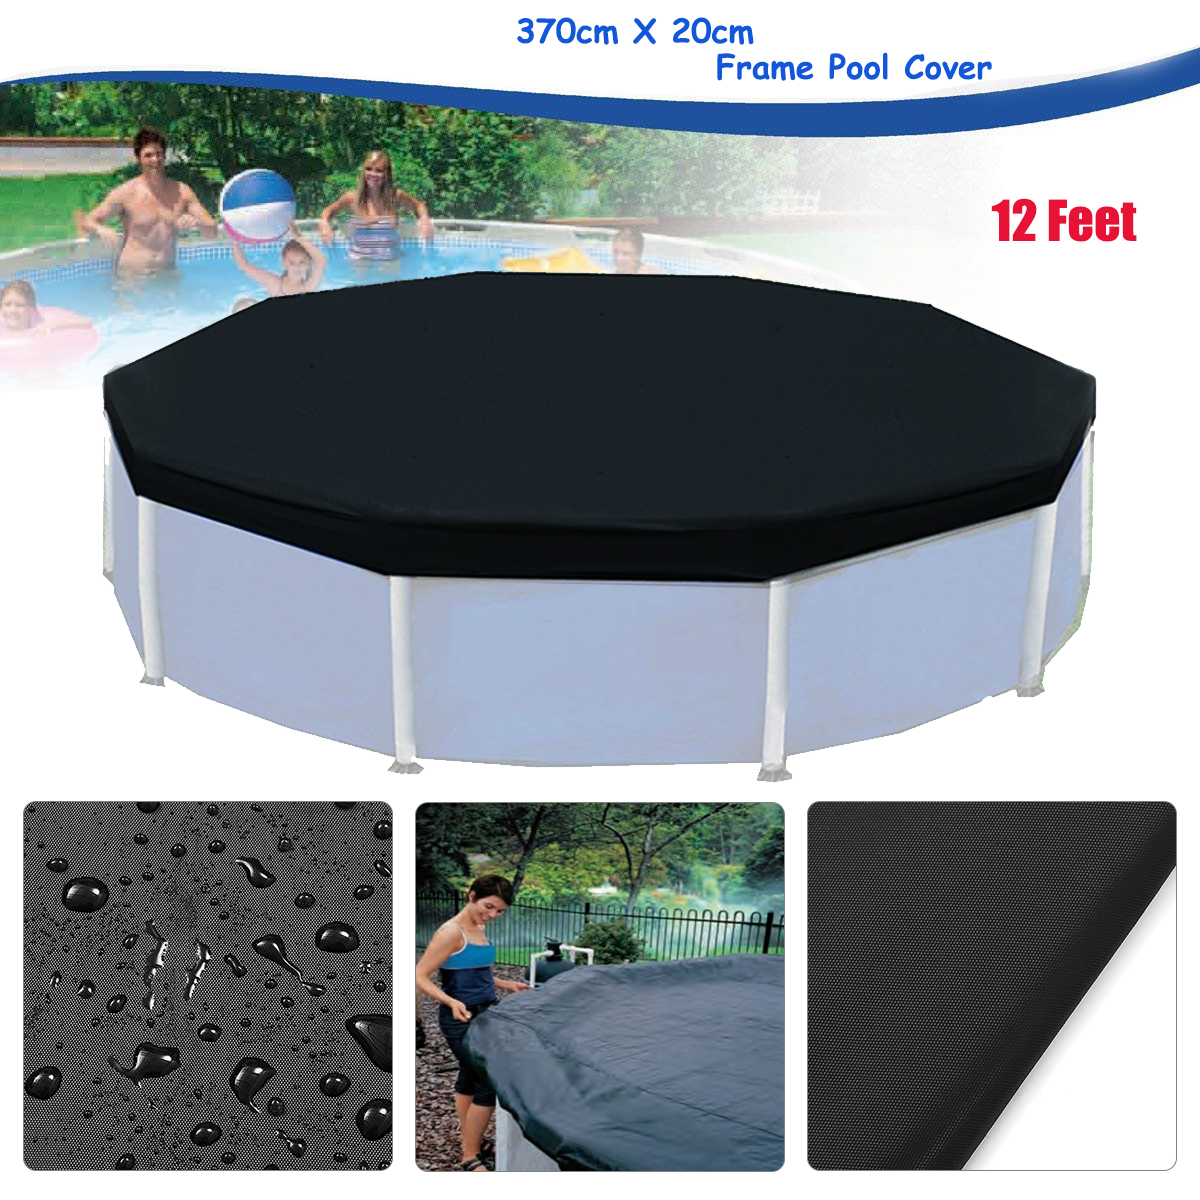 36m-12-Feet-Protective-Black-Pool-Cover-for-Above-Ground-Frame-Swimming-Pools-1351782-1